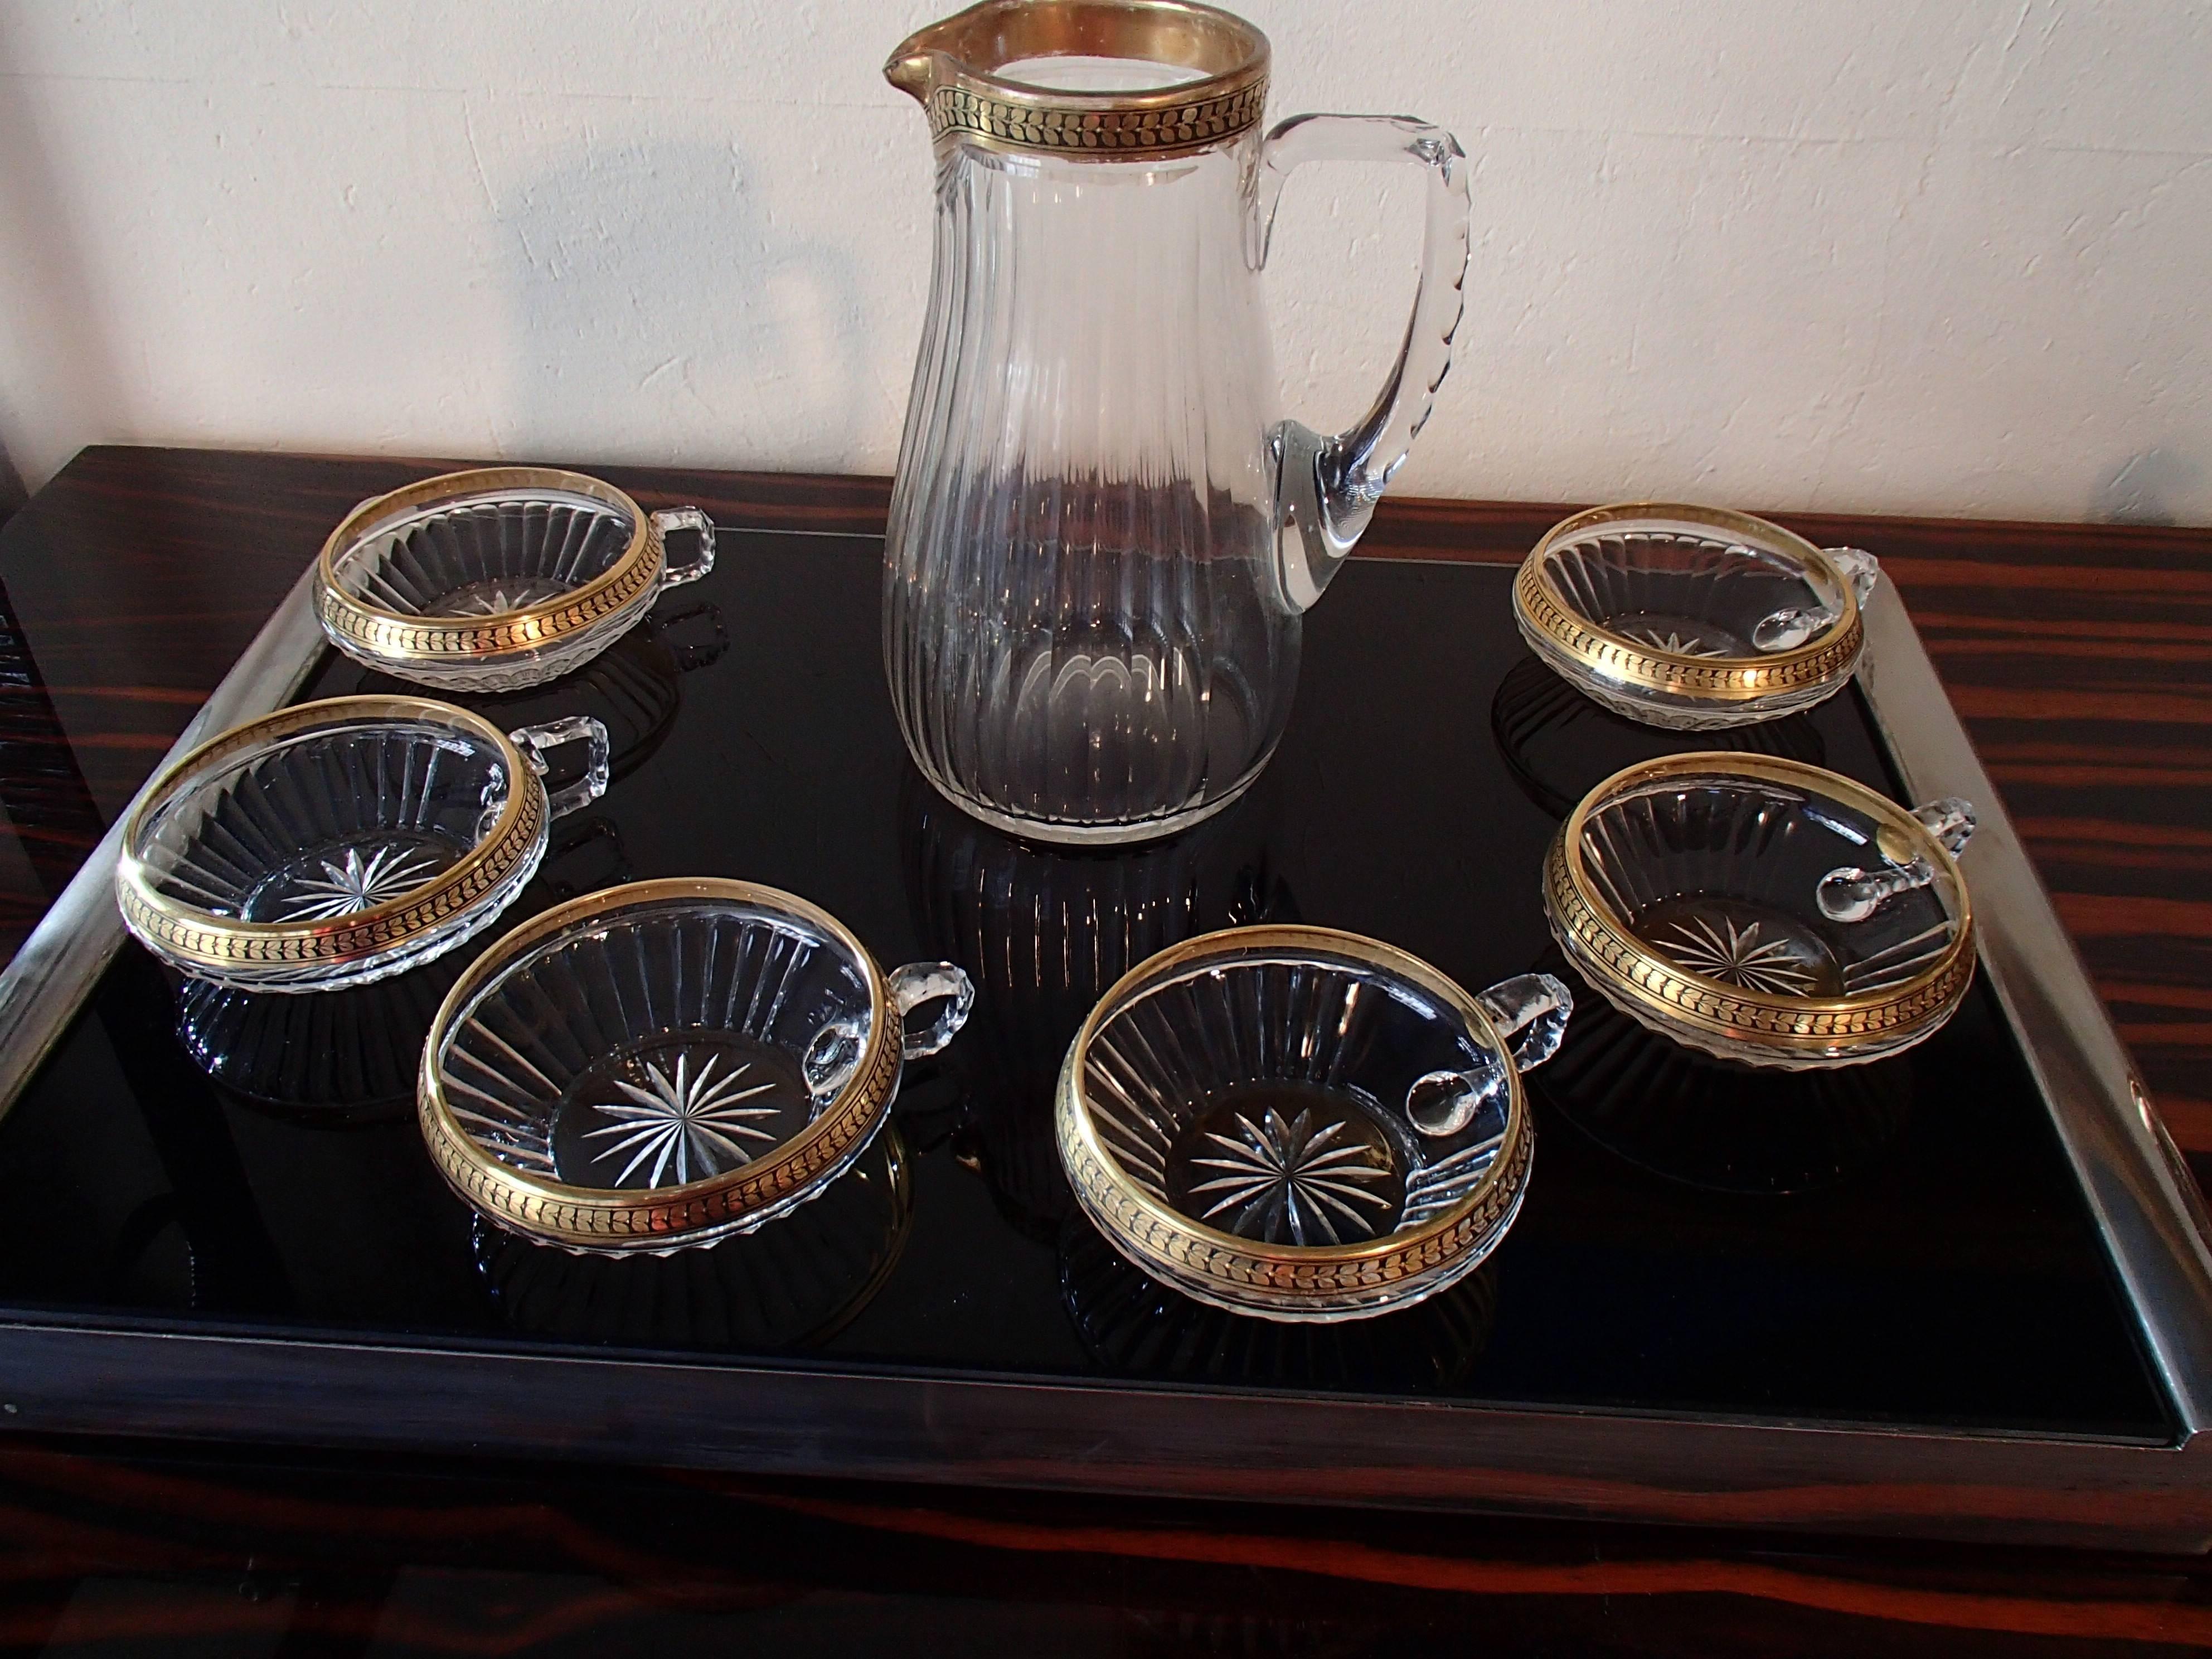 1920 Bohemian crystal set of six cups and jug gold leaf paint.
The jug is 20 cm high the cups 4 cm and the diameter is 10 cm for both.